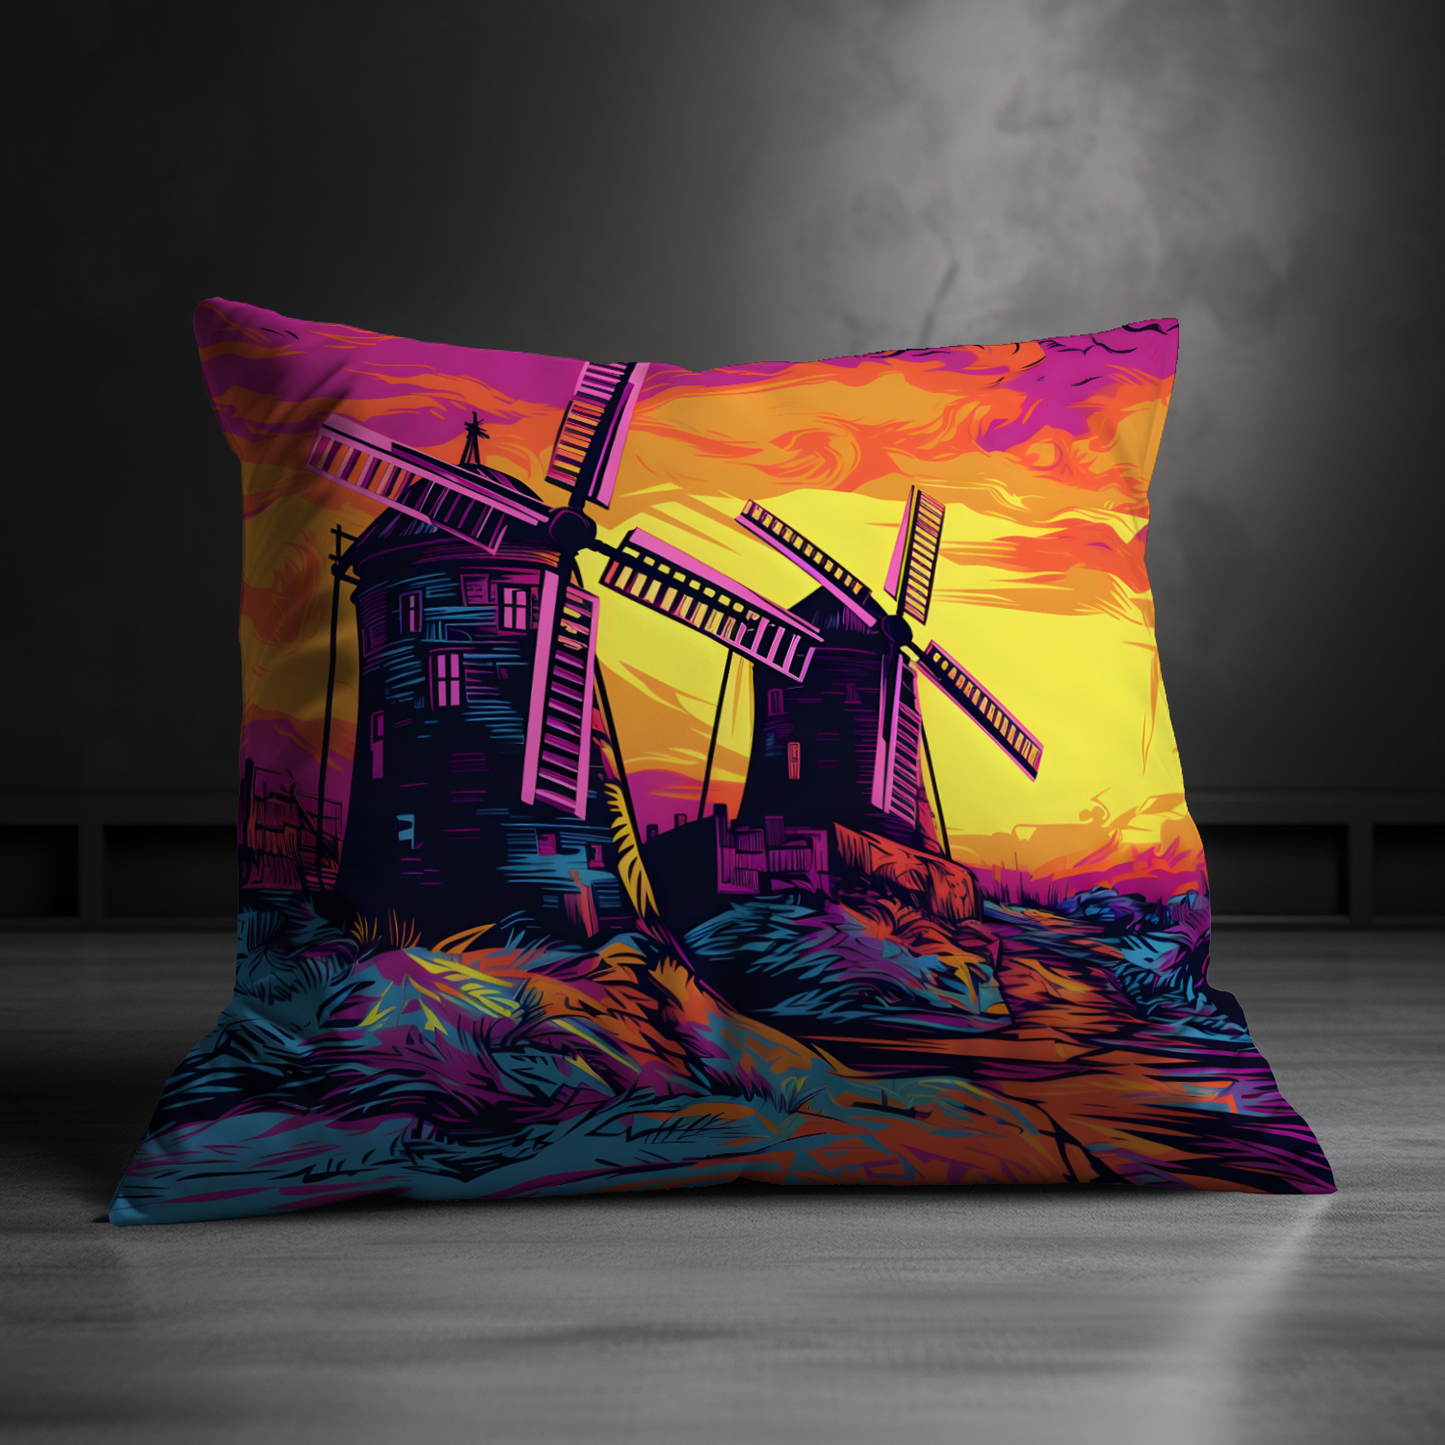 Windmill Whispers  Hand Made Poly Linen Cushions